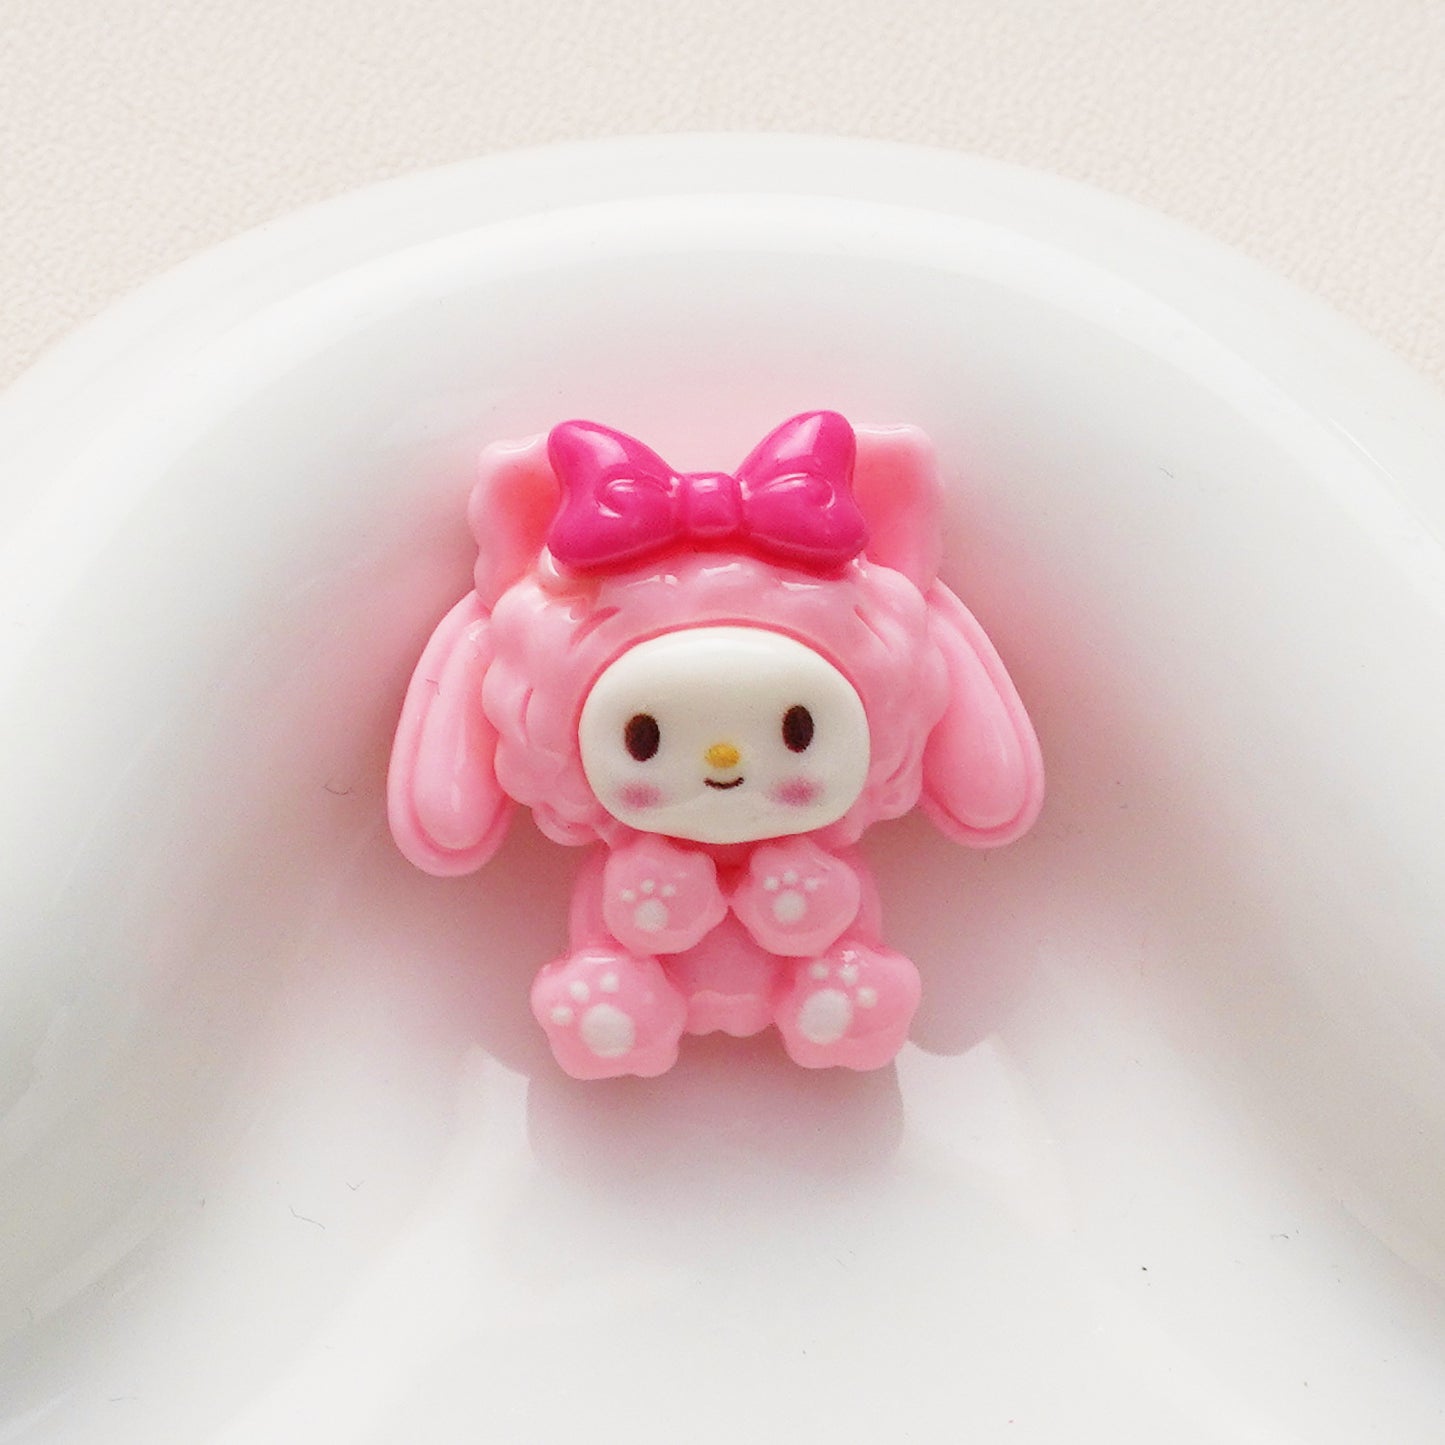 10 PCS Sanrio Resin Charms for DIY Crafts